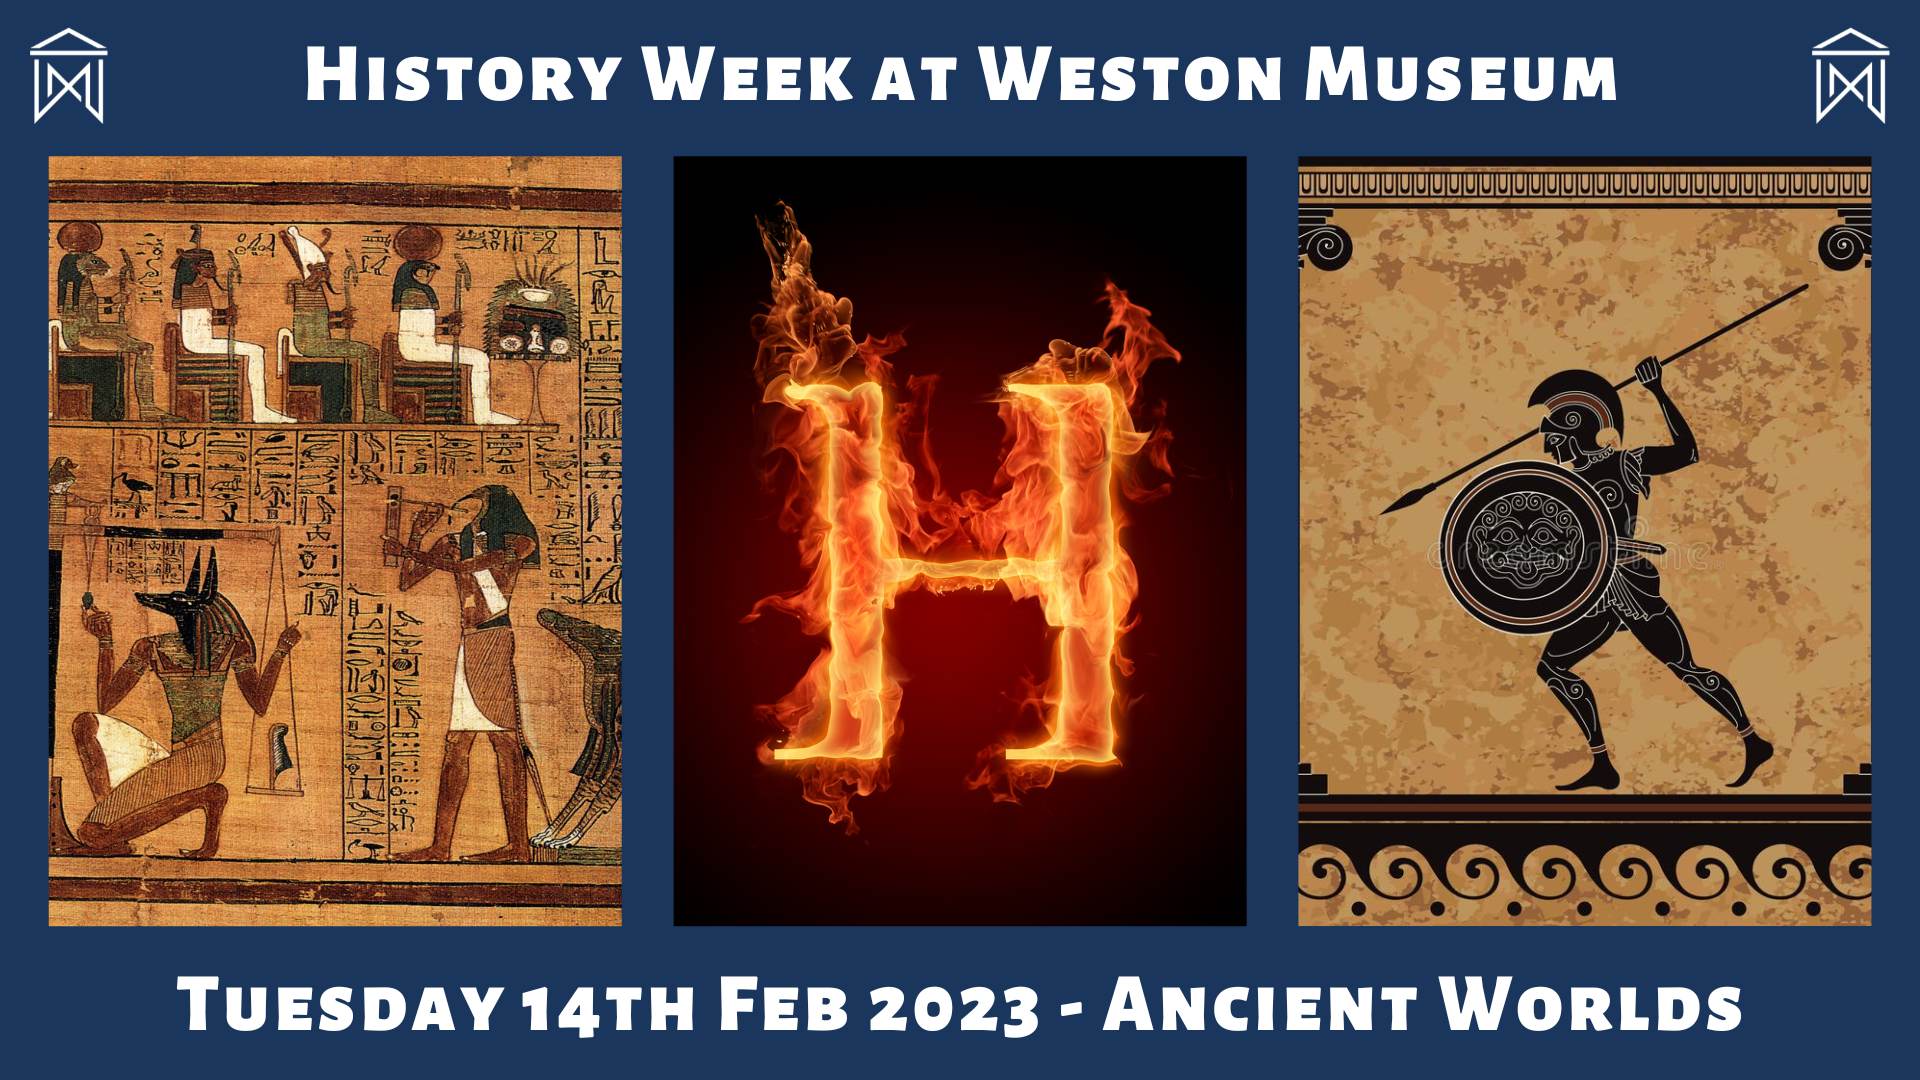 Tuesday 14th Feb 2023 ancient worlds